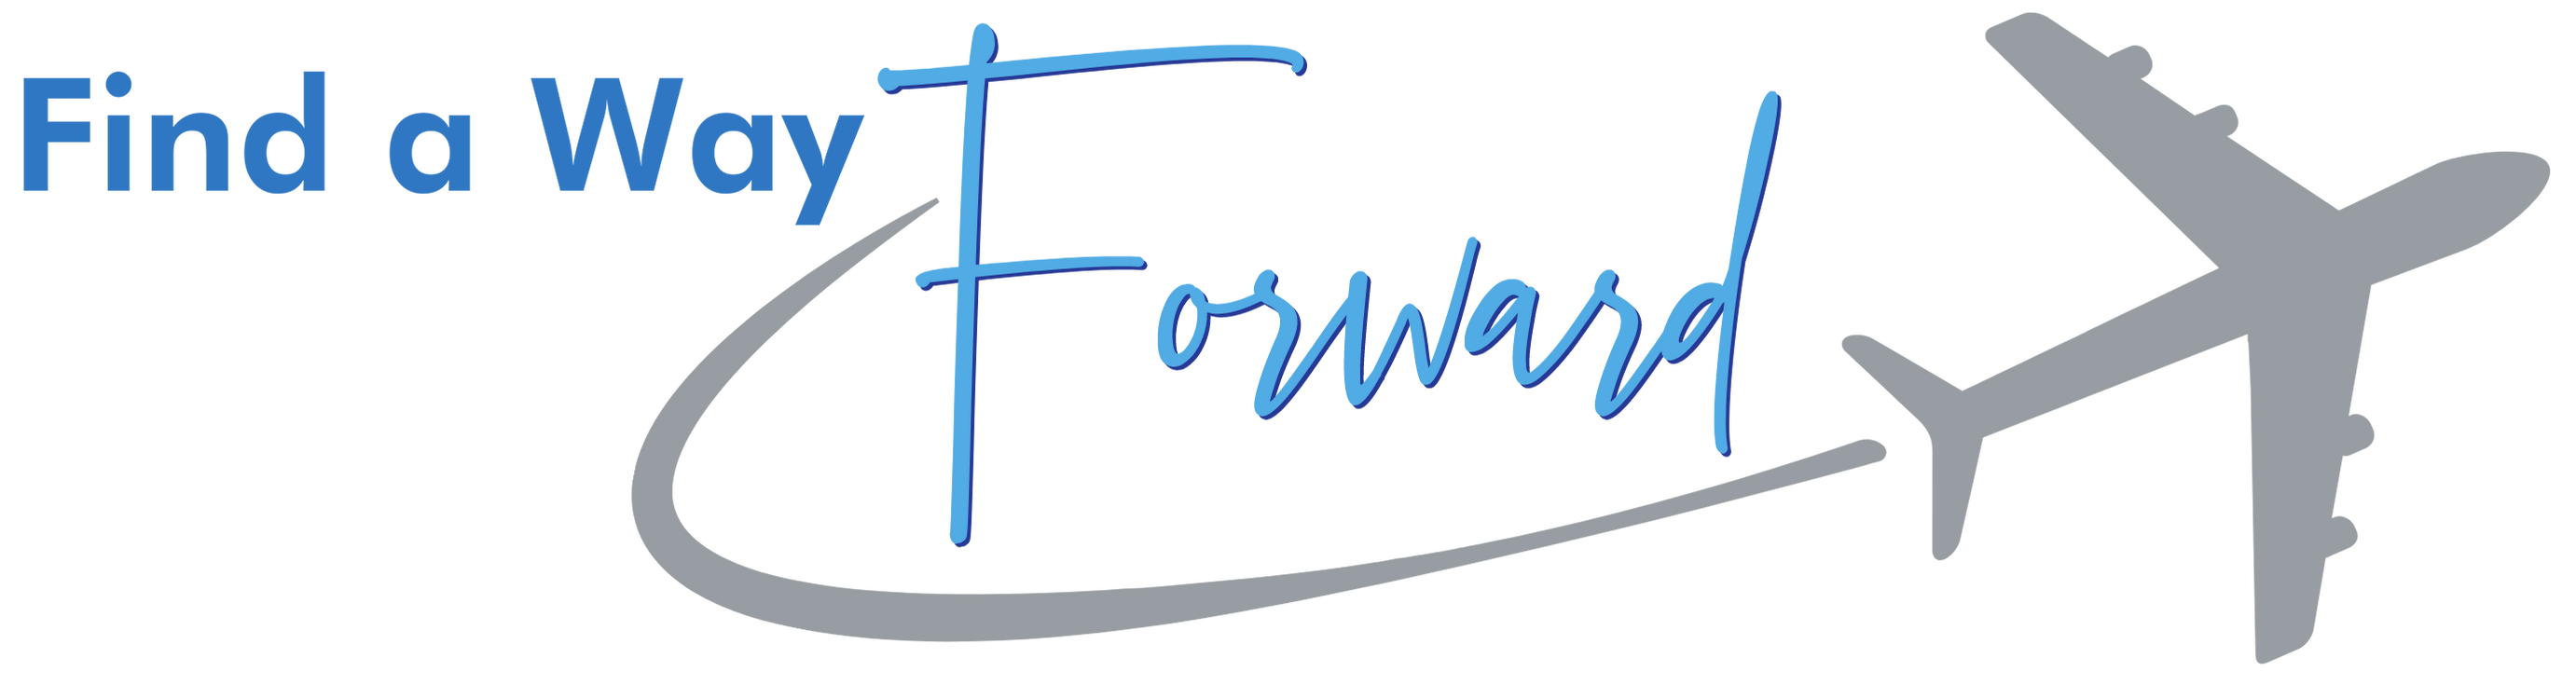 Find a way forward logo with no background